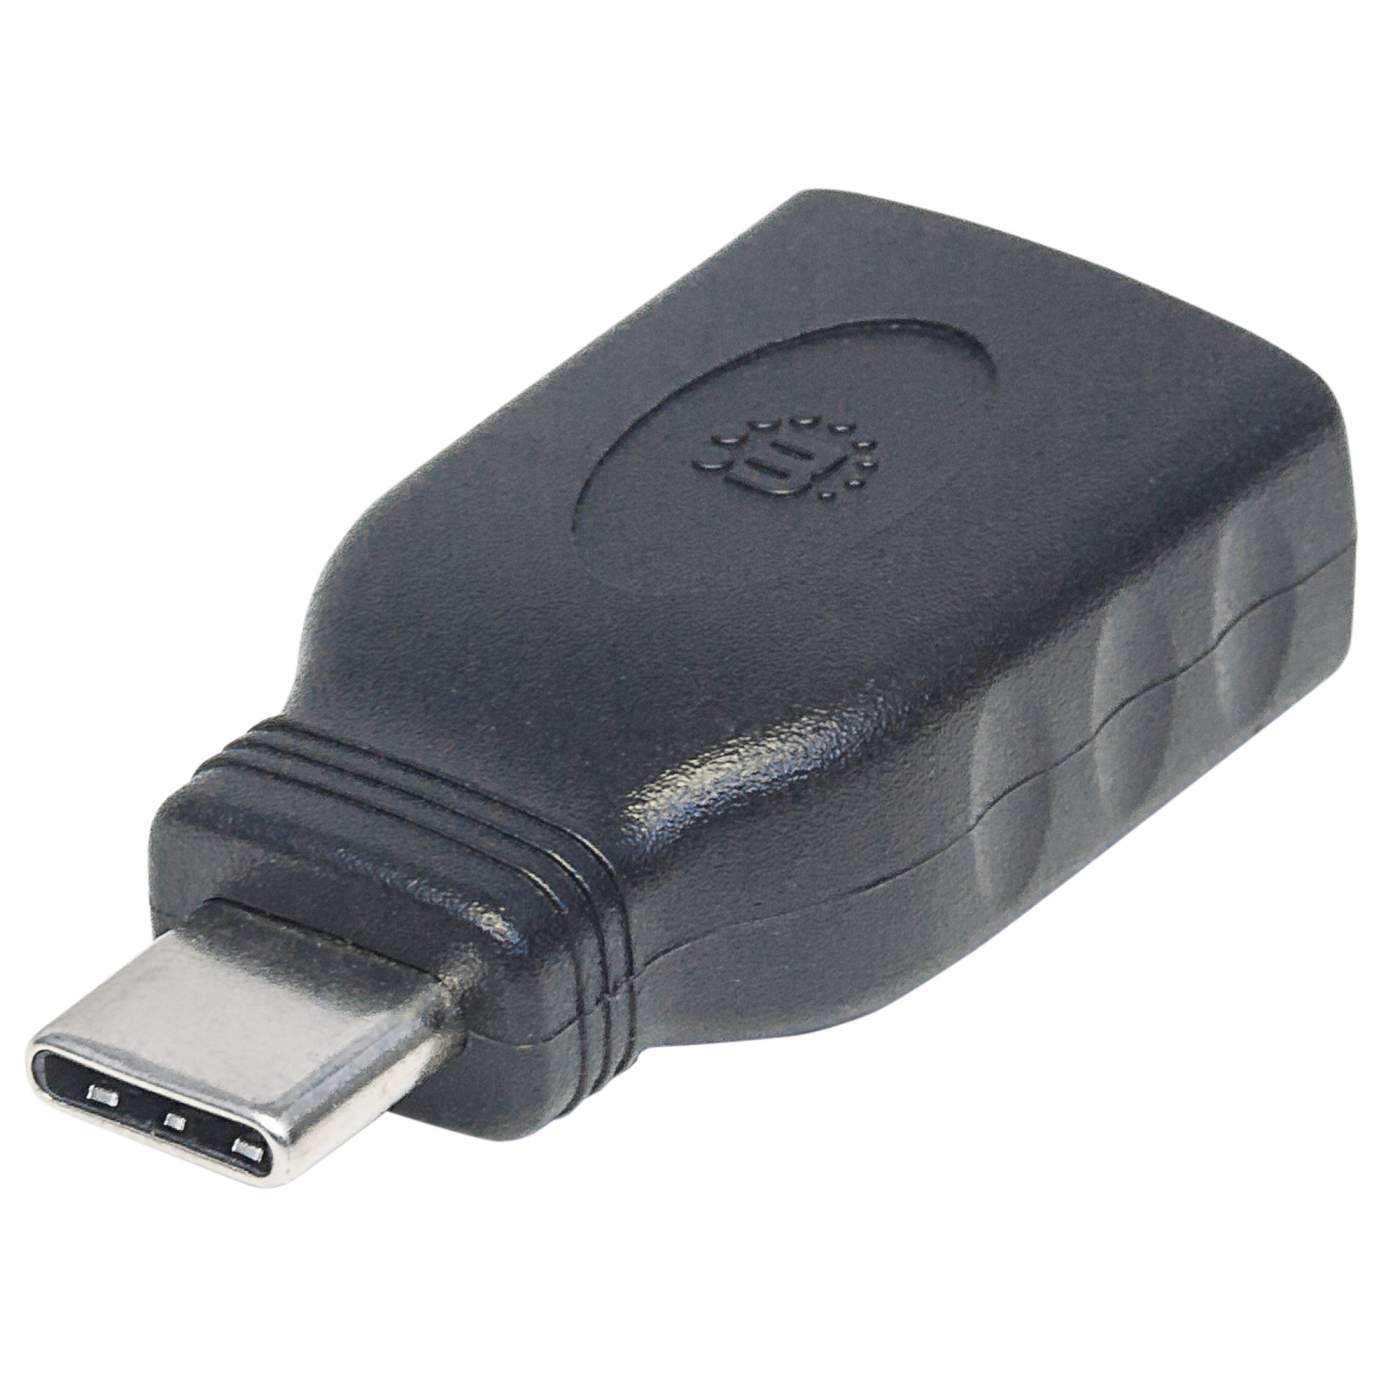 USB-C to USB-A Adapter Image 1